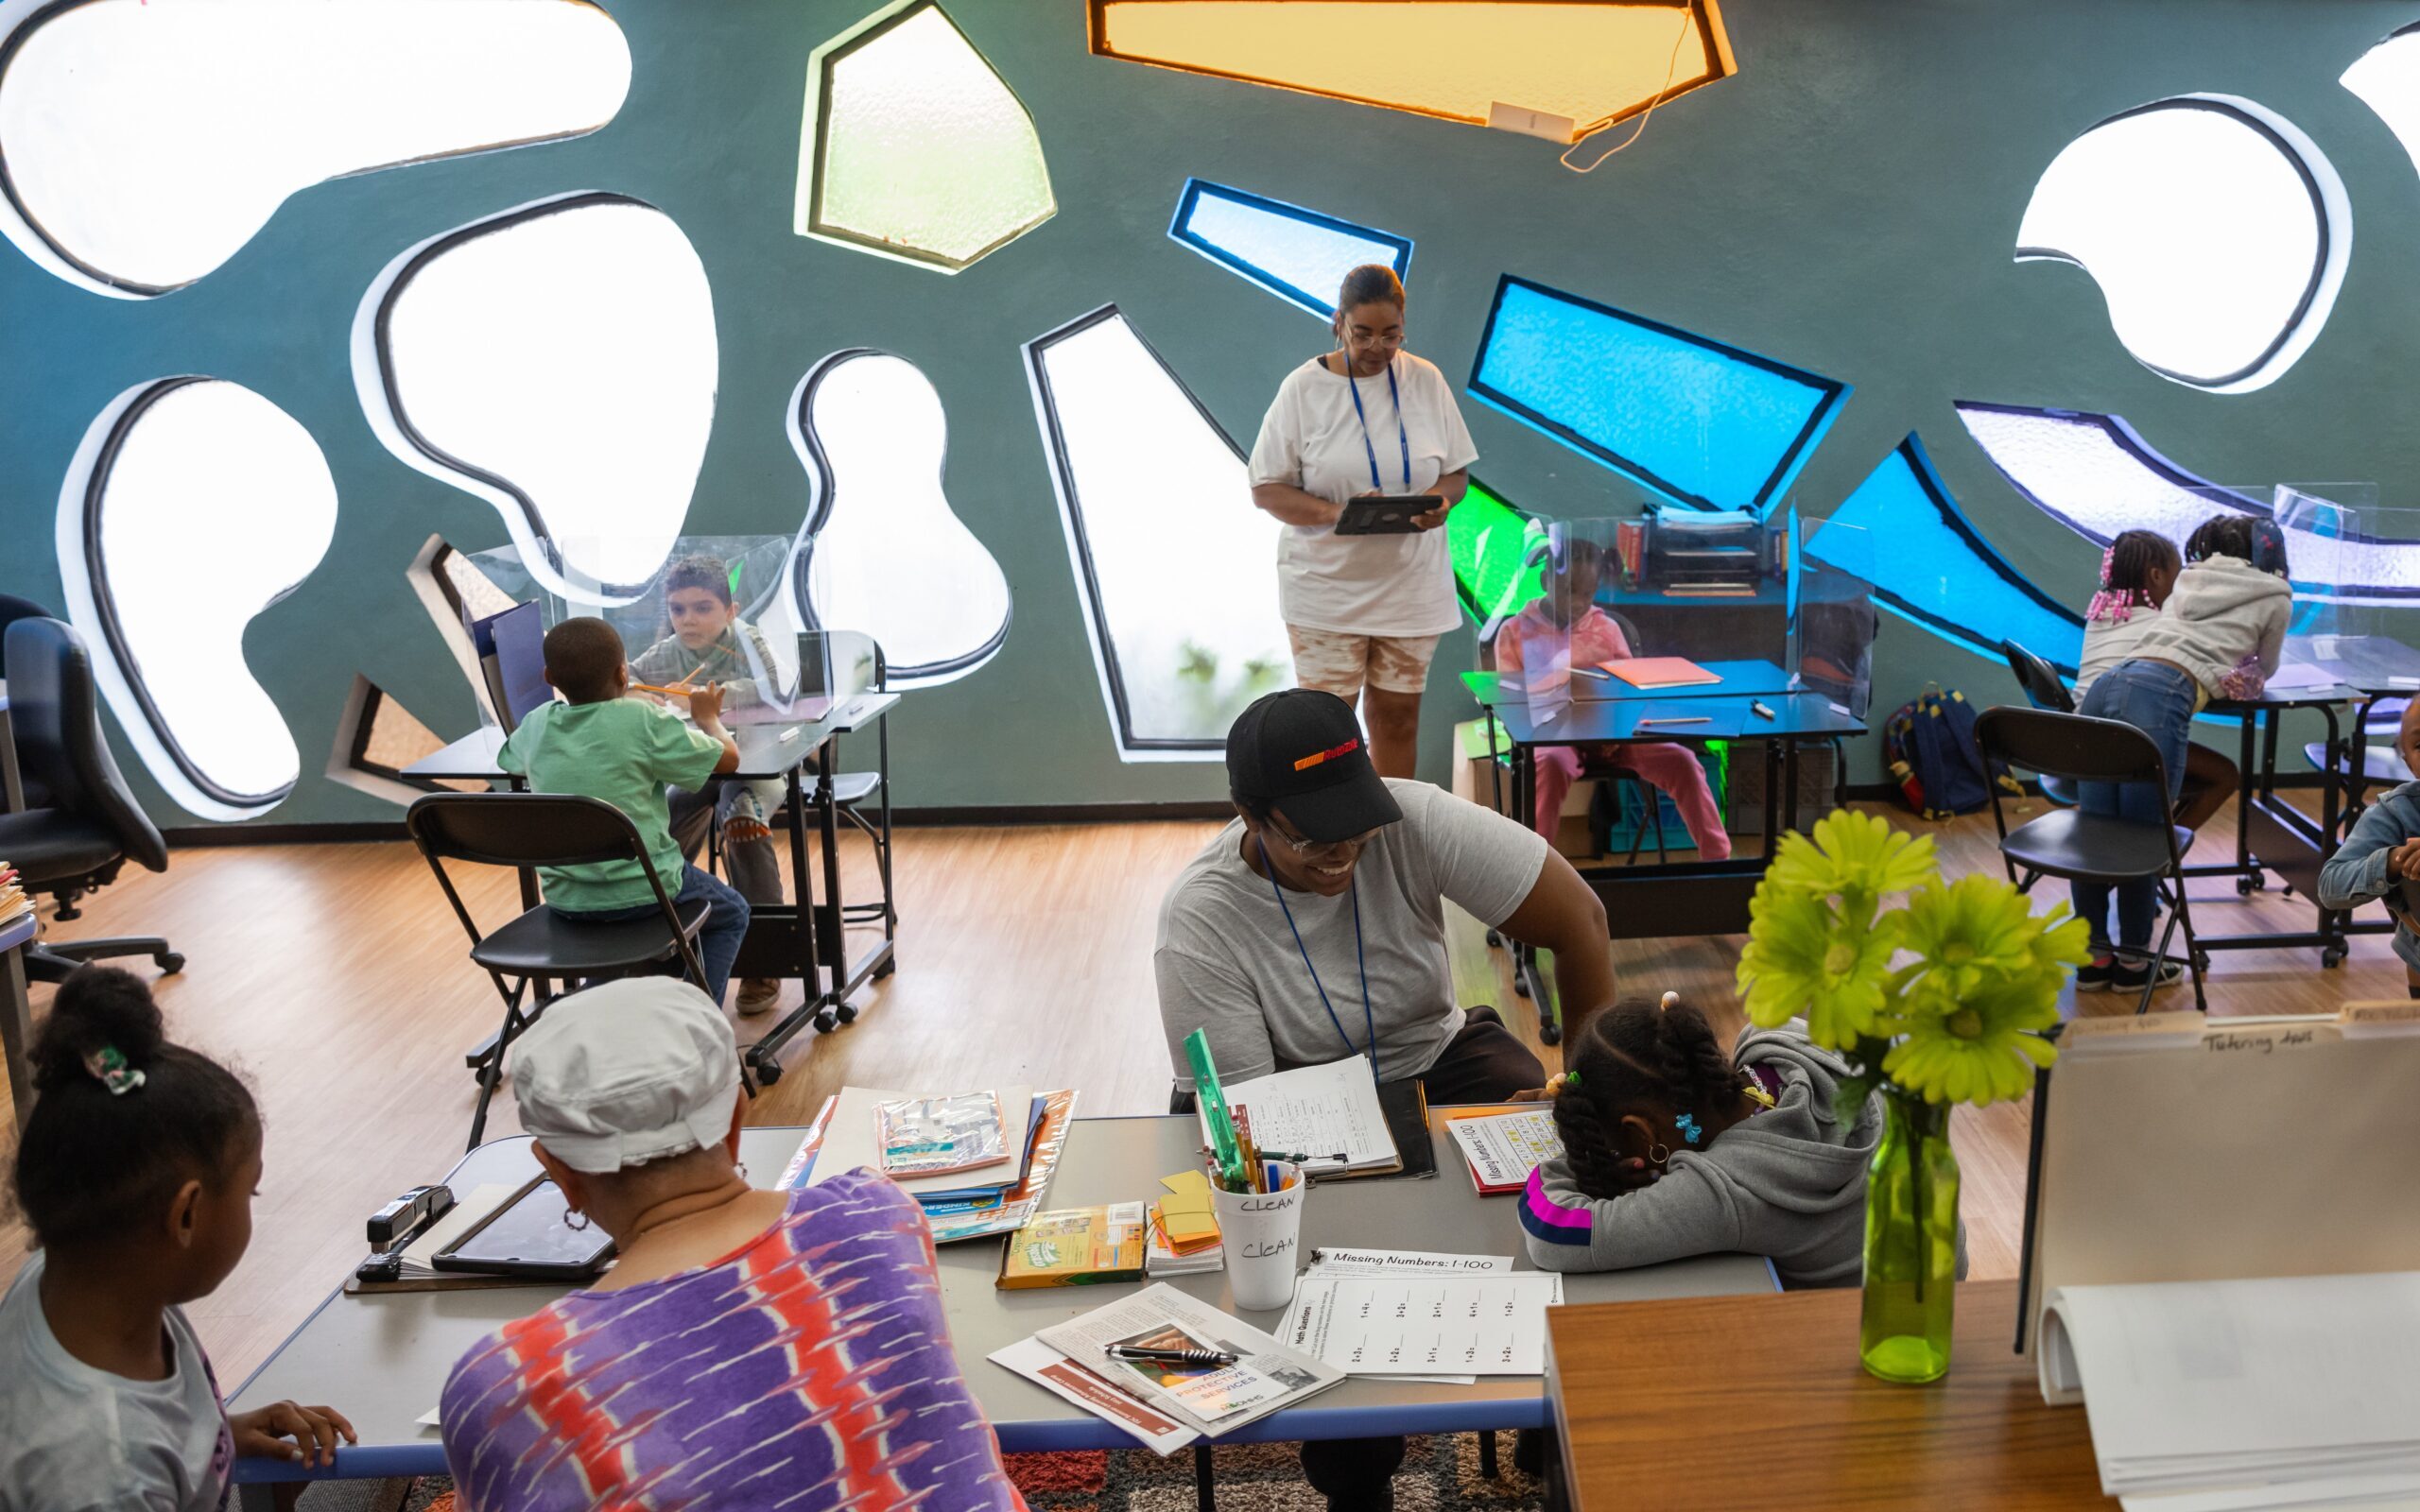 Children and adults engage in educational activities in a colorful classroom with unique wall cut-outs and modern furniture, sponsored by the Ruth Mott Foundation.